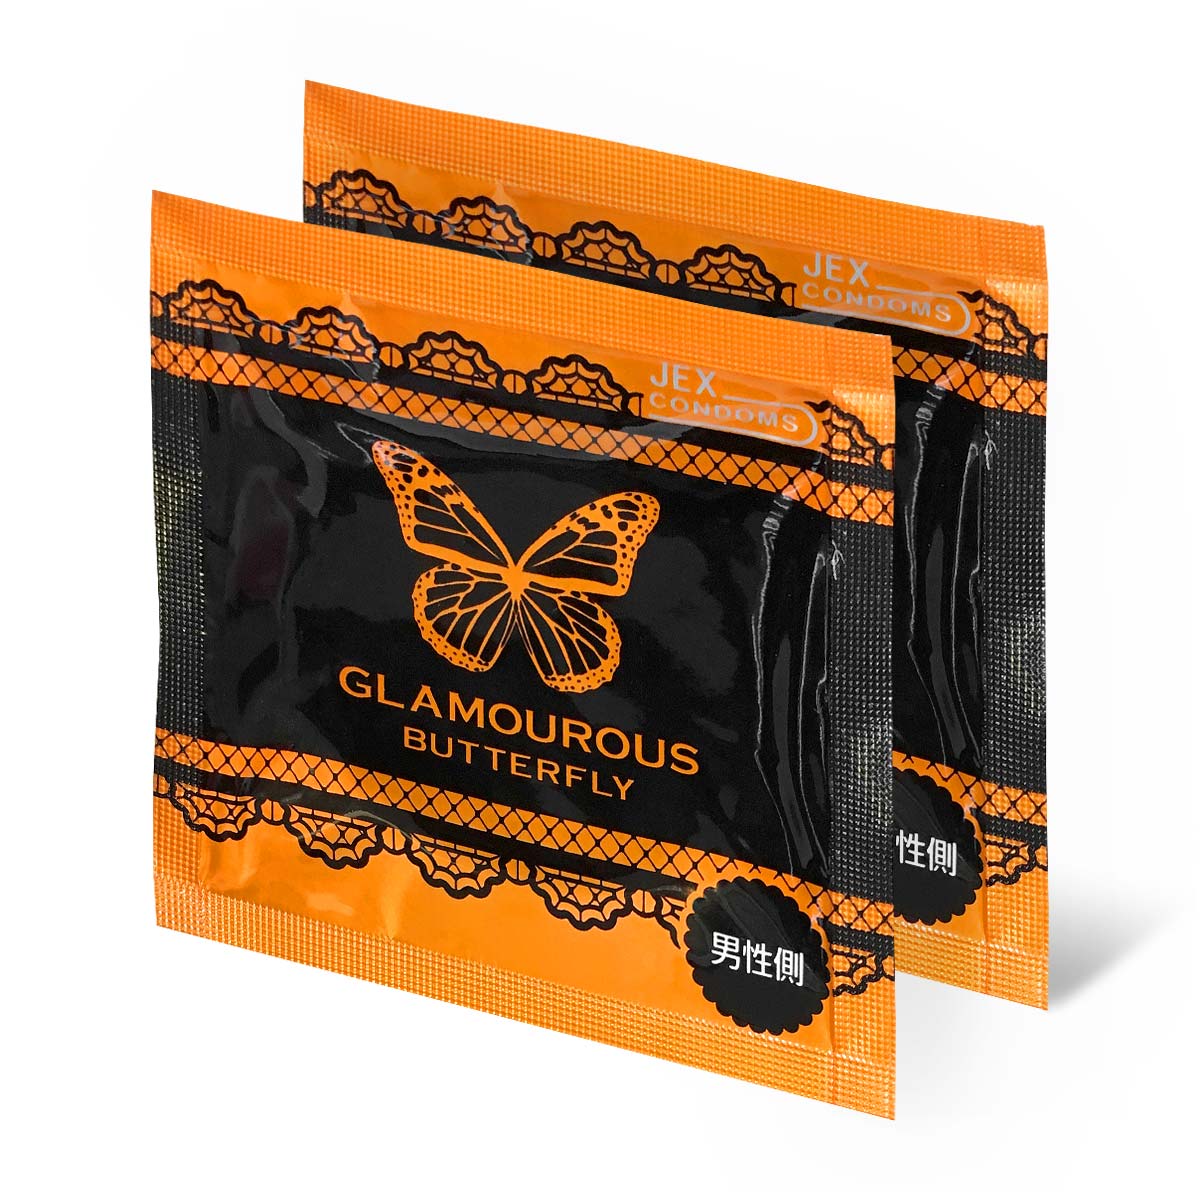 Glamourous Butterfly Large Size 55mm 2 pieces Latex Condom-p_1